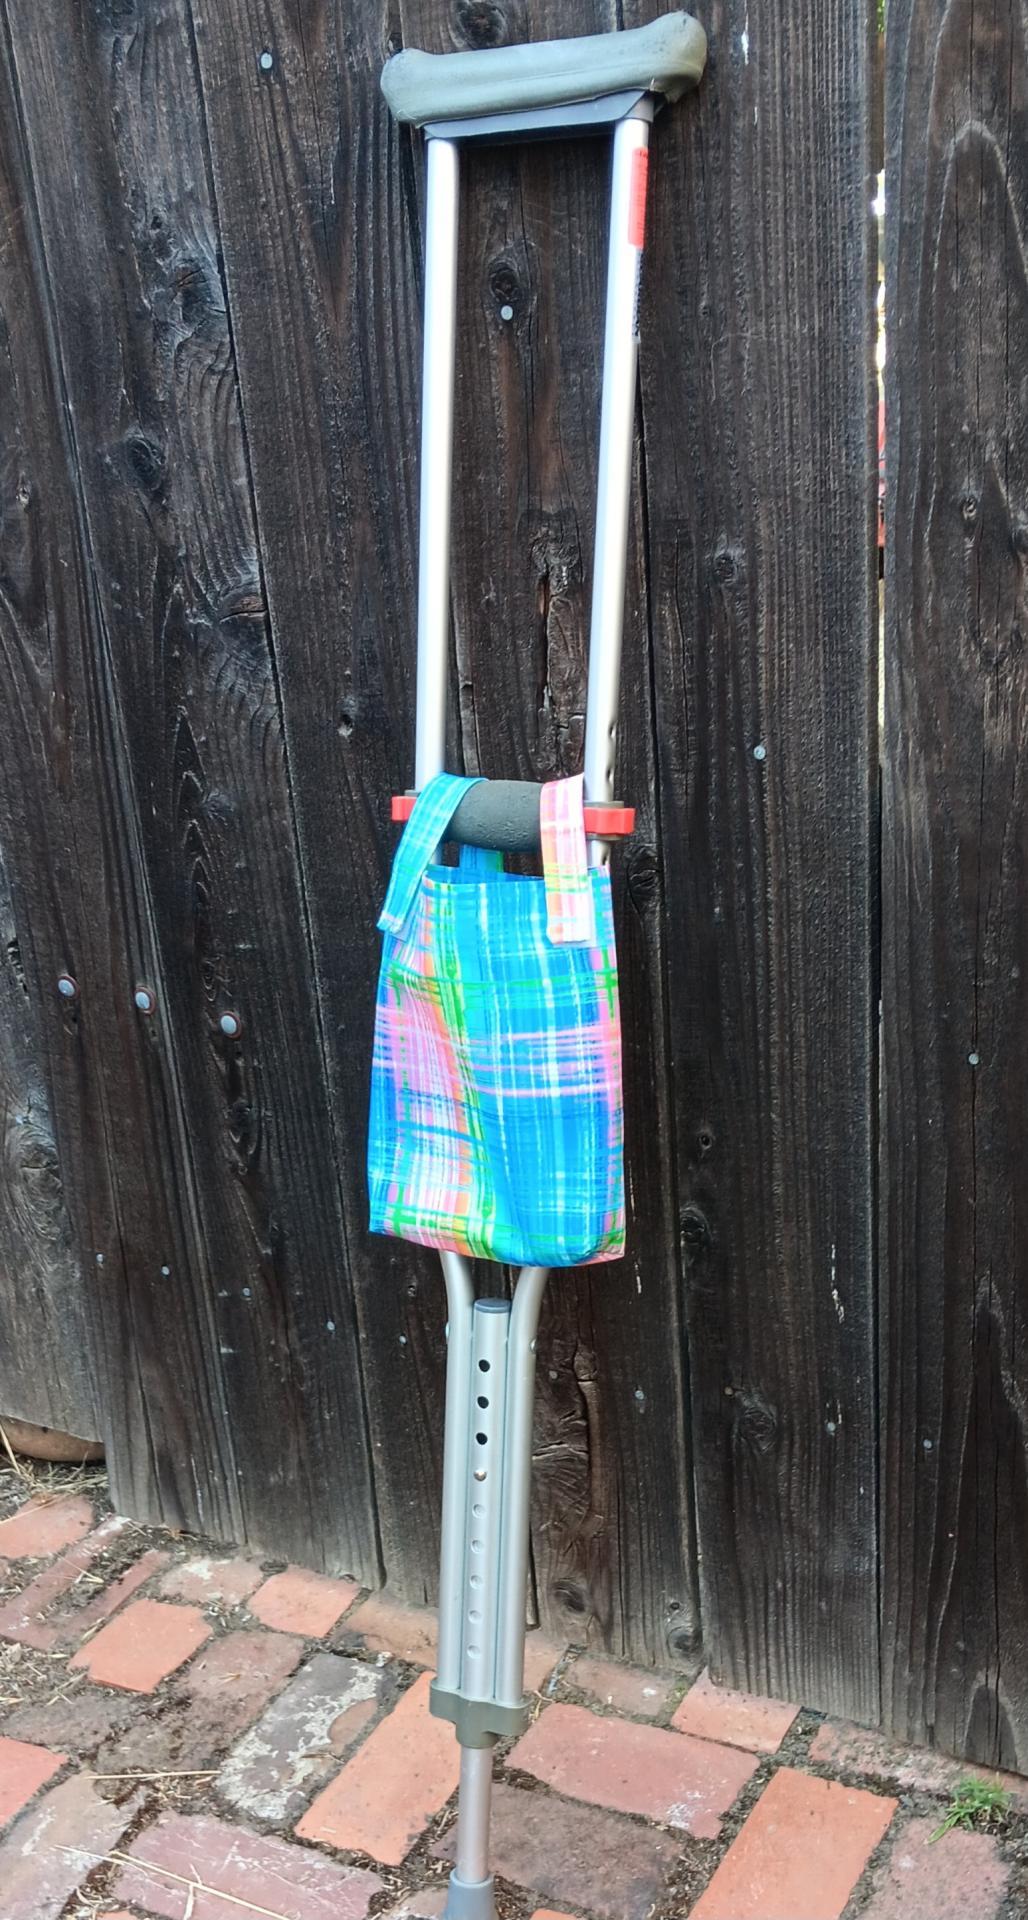 Simple small basic bag for crutch, walker, stroller, scooter handlebars, bed rail, caddy, hook and loop, bright plaid, blue pink green orange